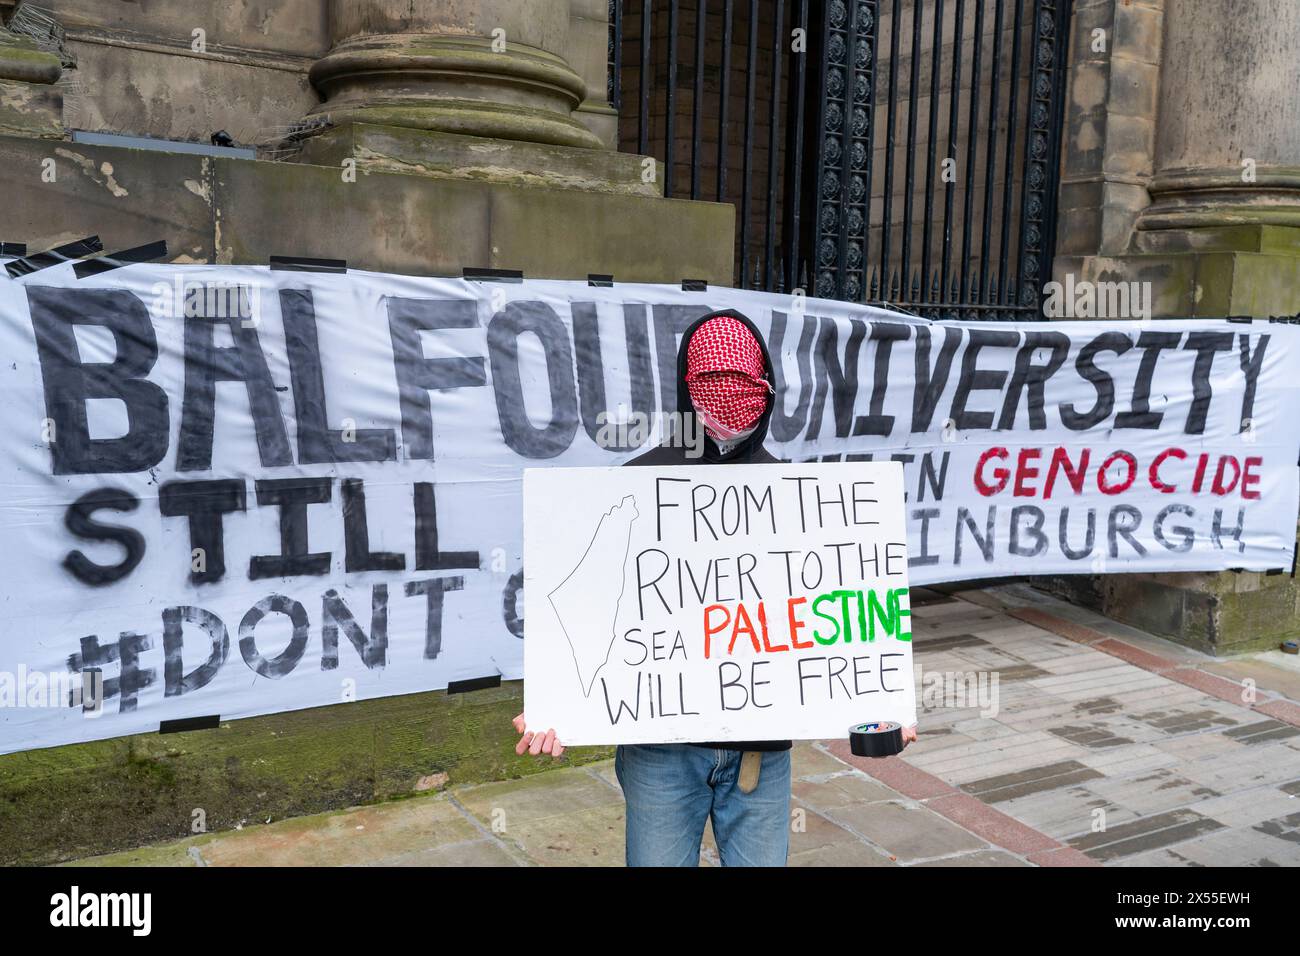 Edinburgh, Scotland, UK. 7th  May 2024. Student activists at the University of Edinburgh  Old College have occupied the quad to protest against the Israeli military offensive in Gaza . The Pro-Palestinian protesters have erected tents and banners on the University property.  Iain Masterton/Alamy Live News Stock Photo